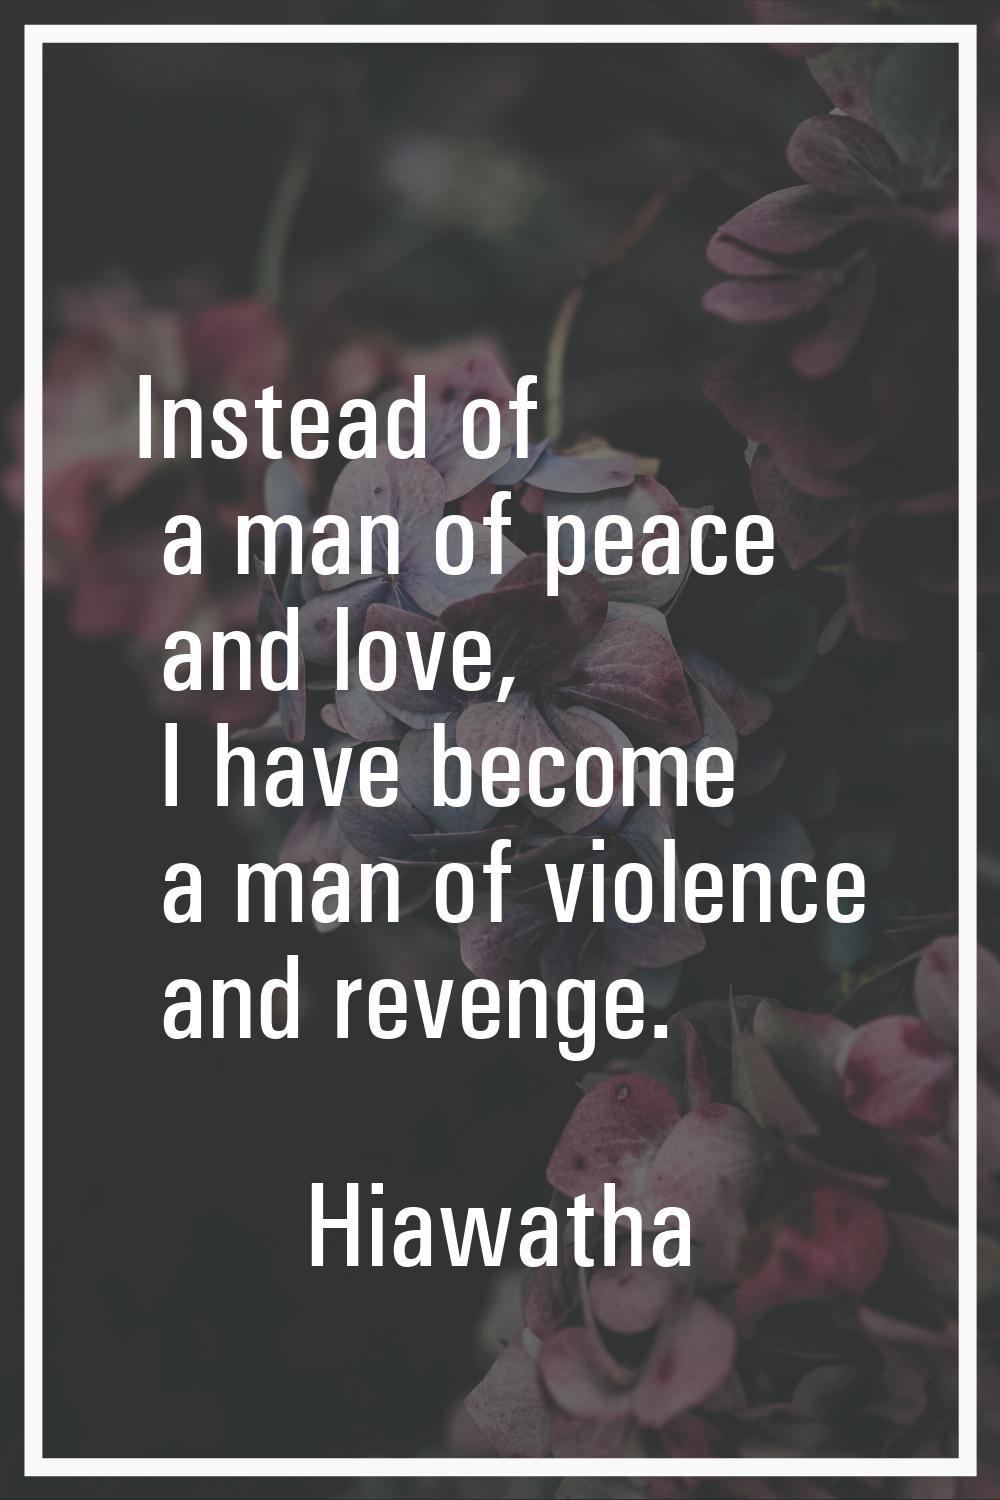 Instead of a man of peace and love, I have become a man of violence and revenge.